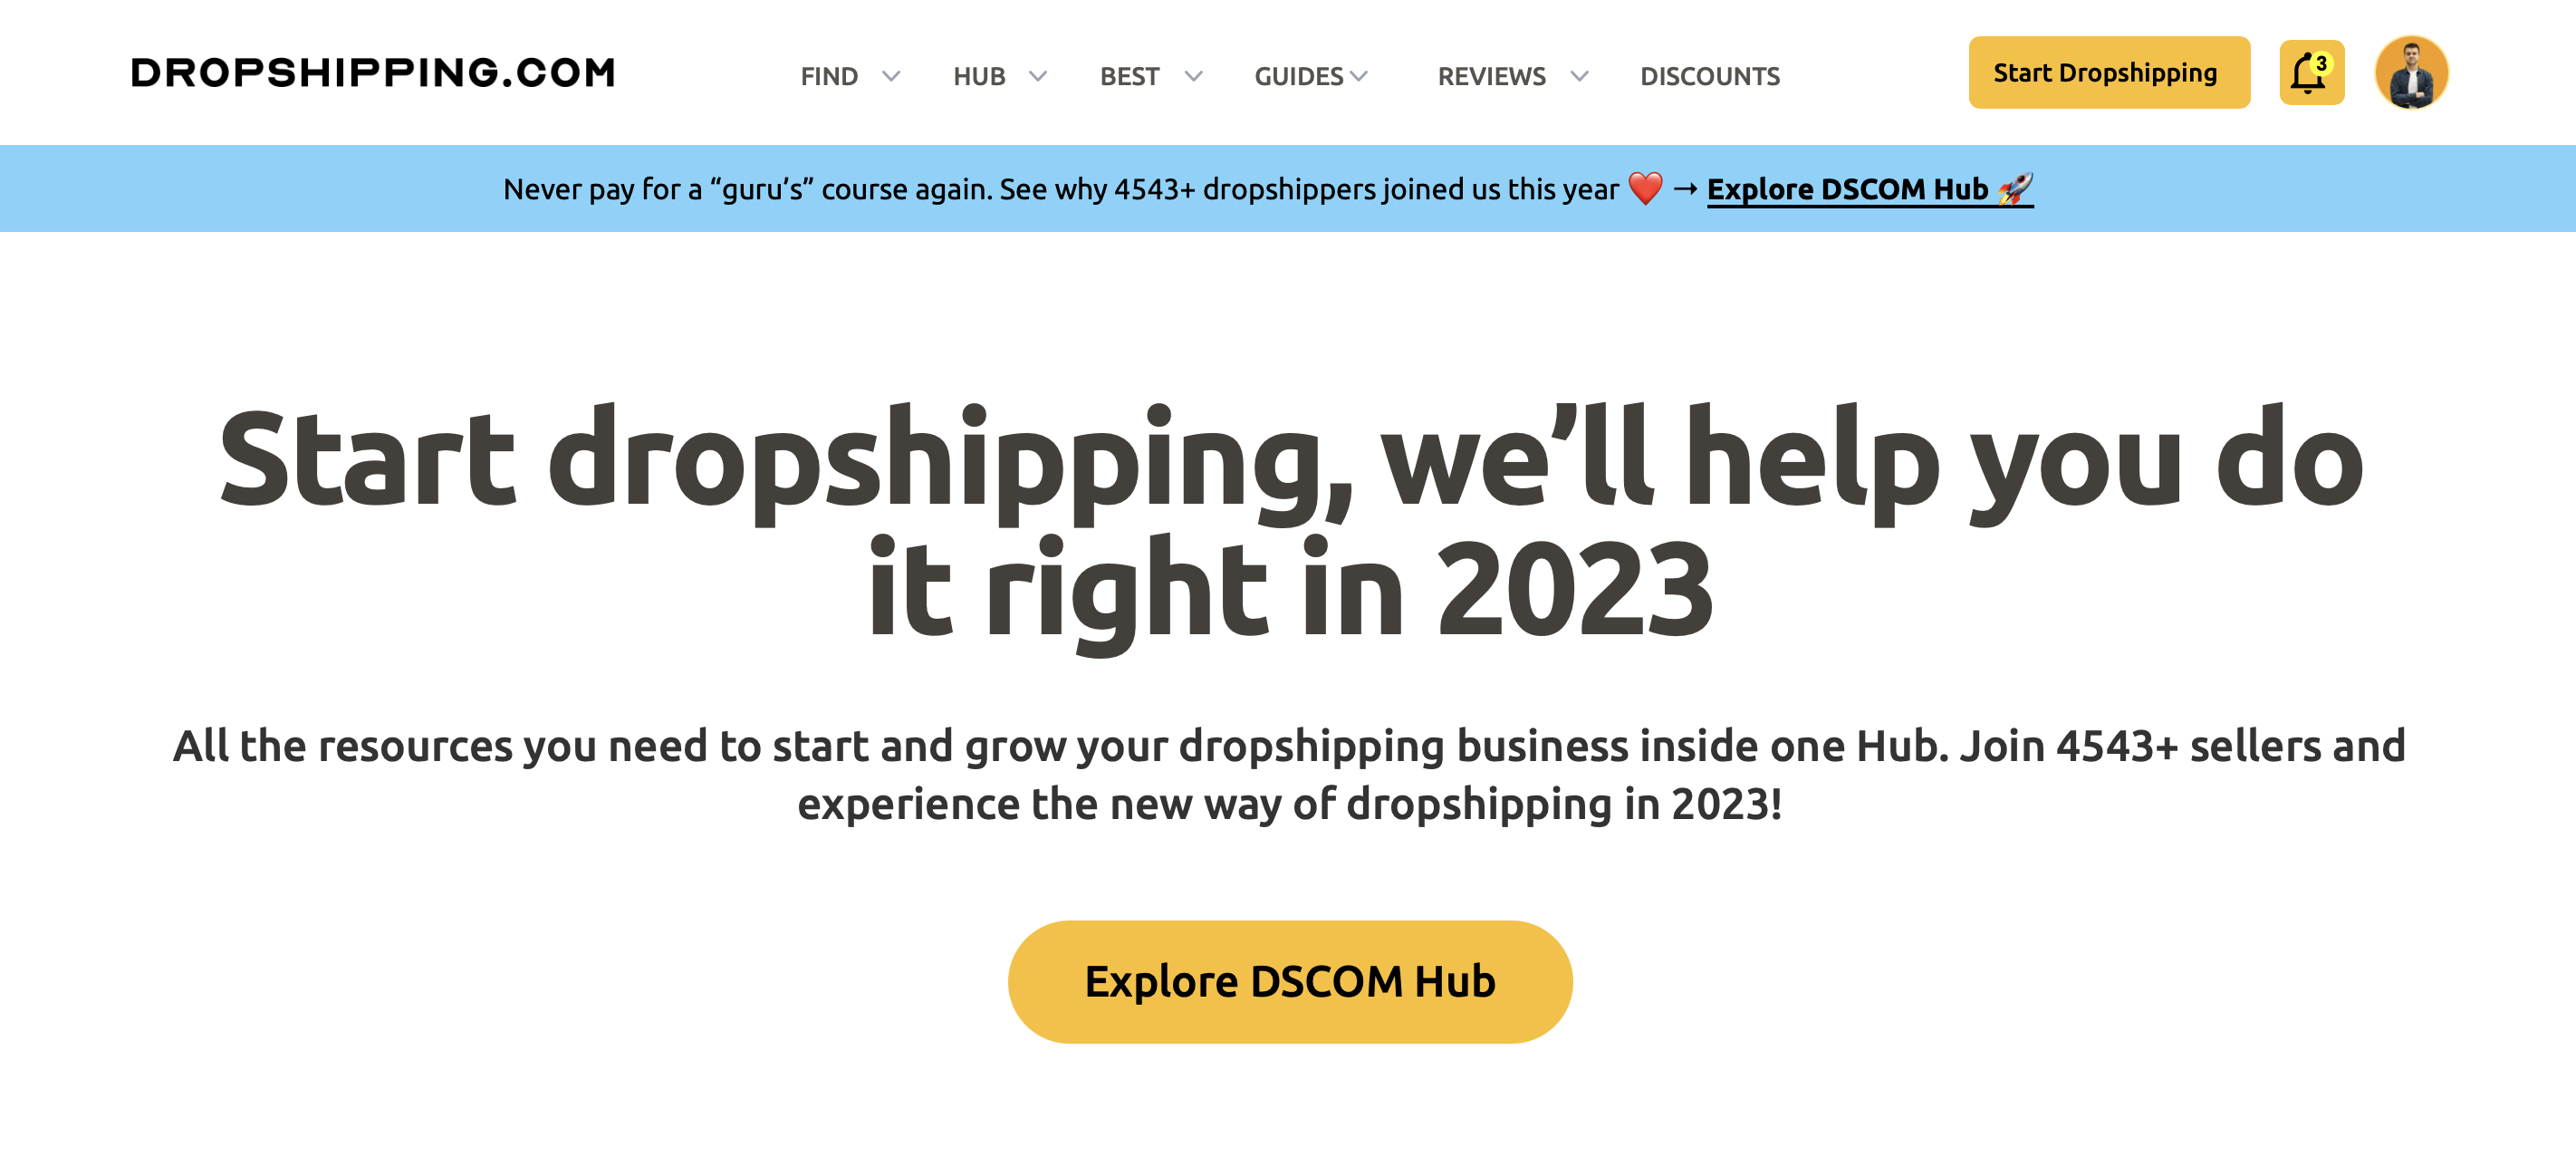 Dropshipping Agent: How To Find The Best Dropshipping Agents?